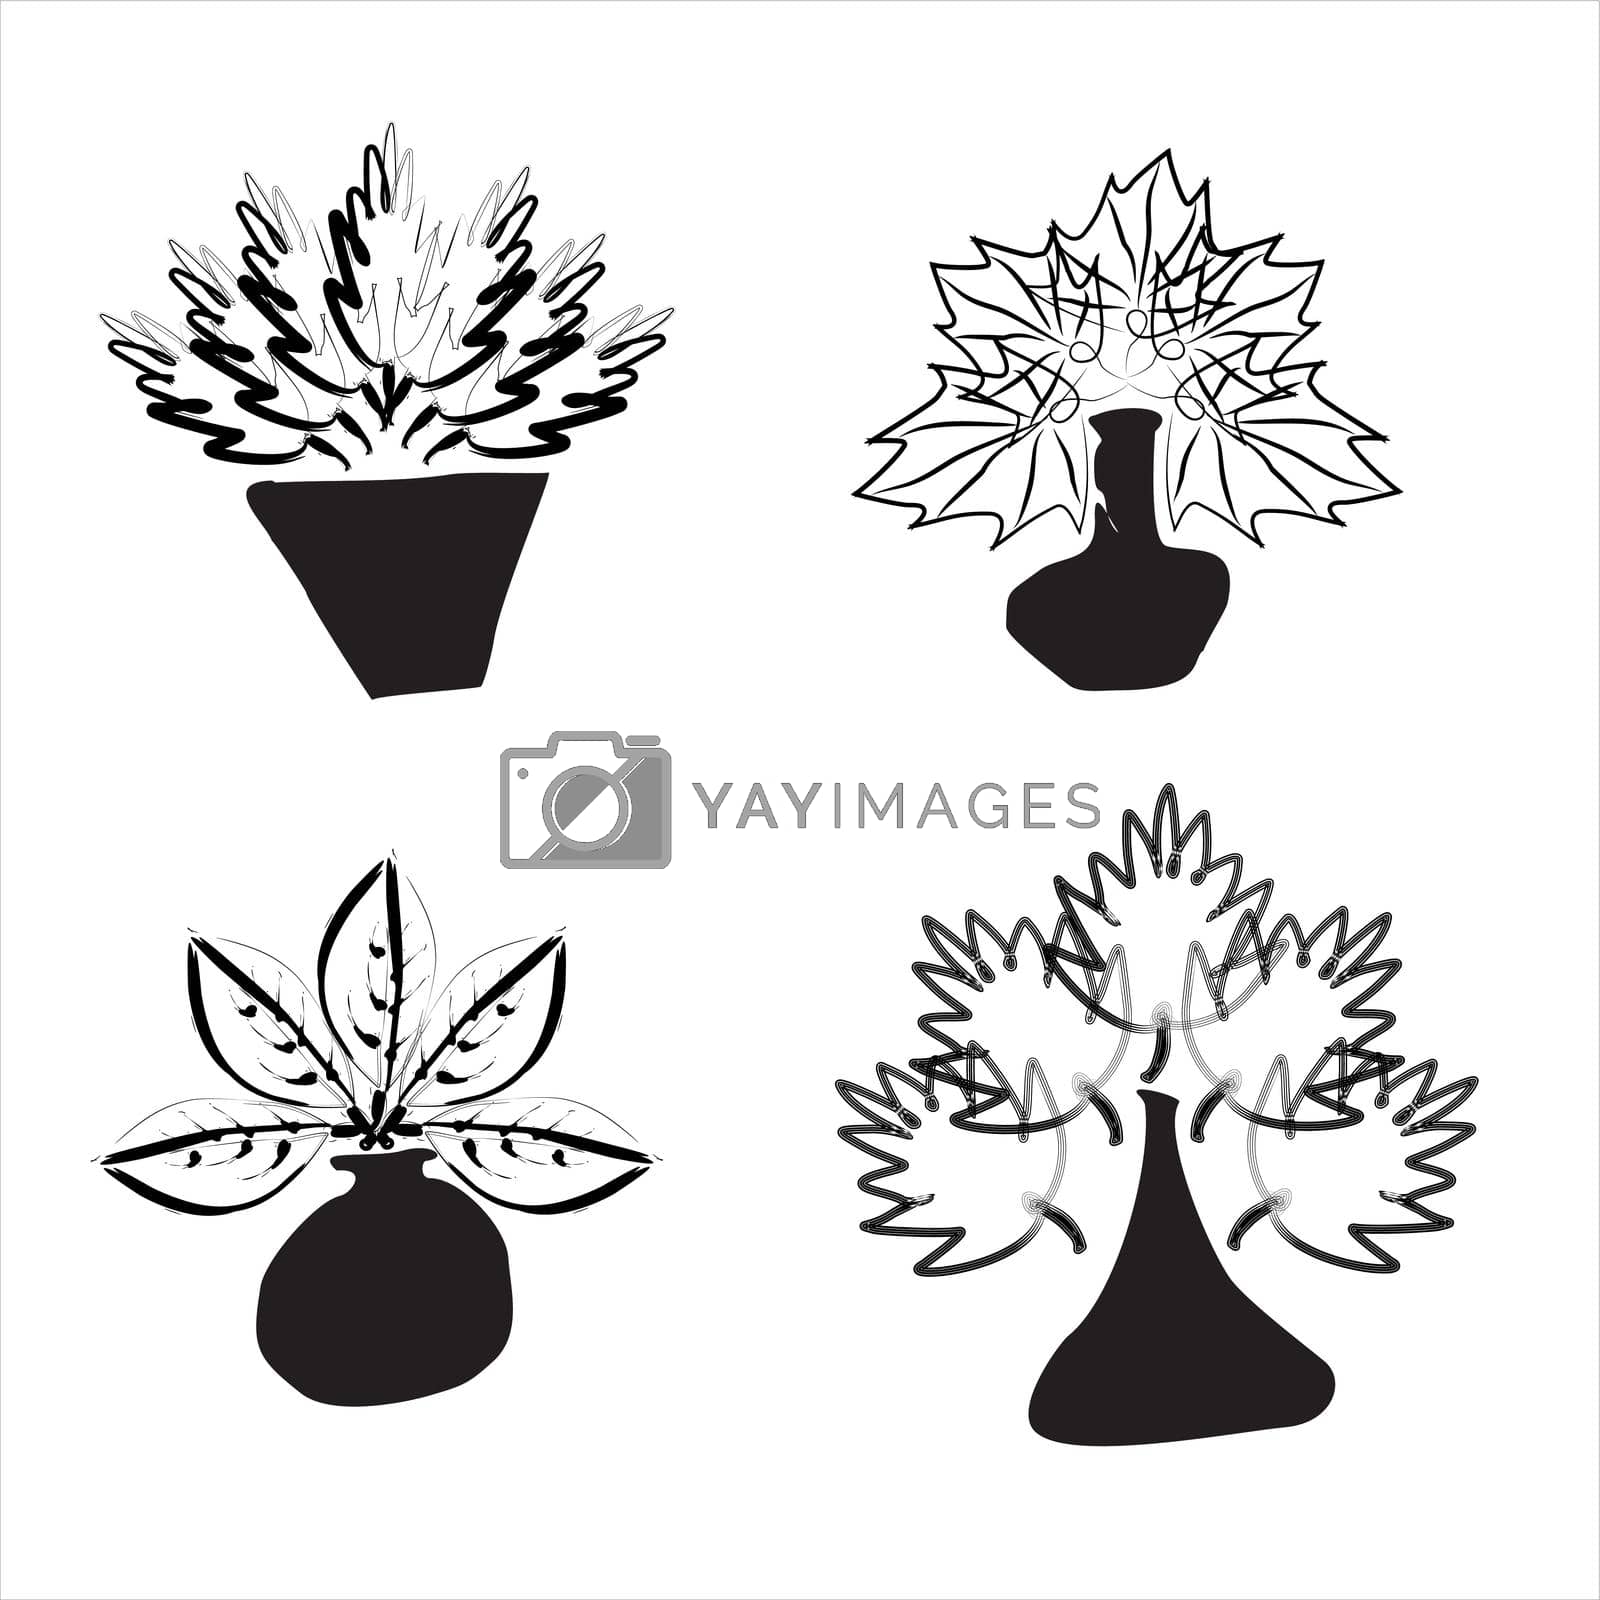 Royalty free image of Vector illustration of a flower vase for design elements, decorations and wall decorations by klopo